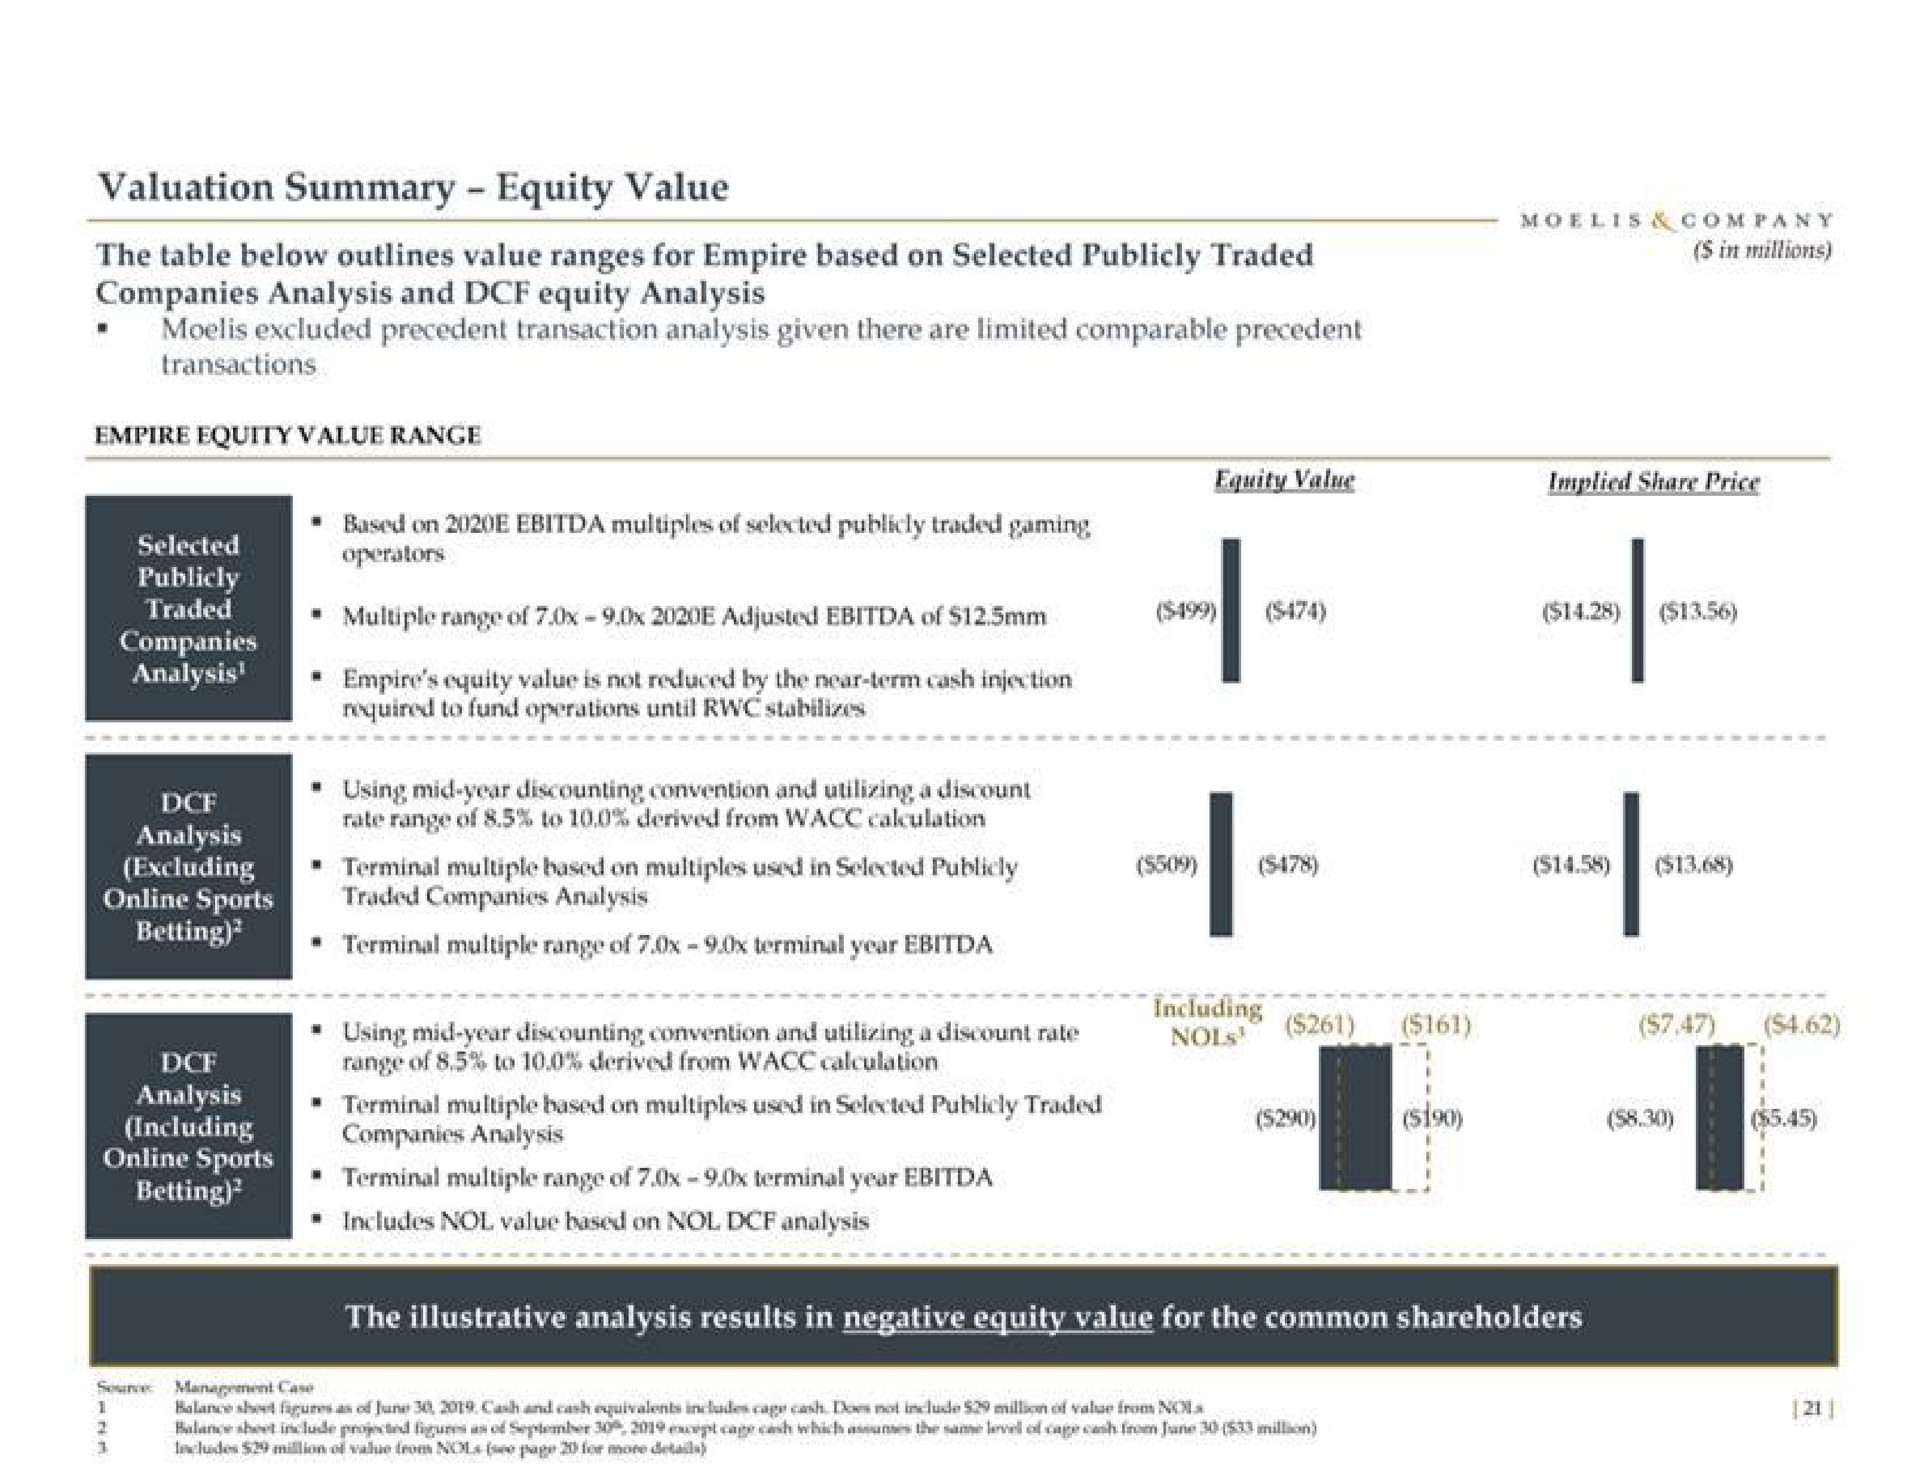 valuation summary equity value the table below outlines value ranges for empire based on selected publicly traded in millions empire equity value range equity value implied share price companies analysis | Moelis & Company